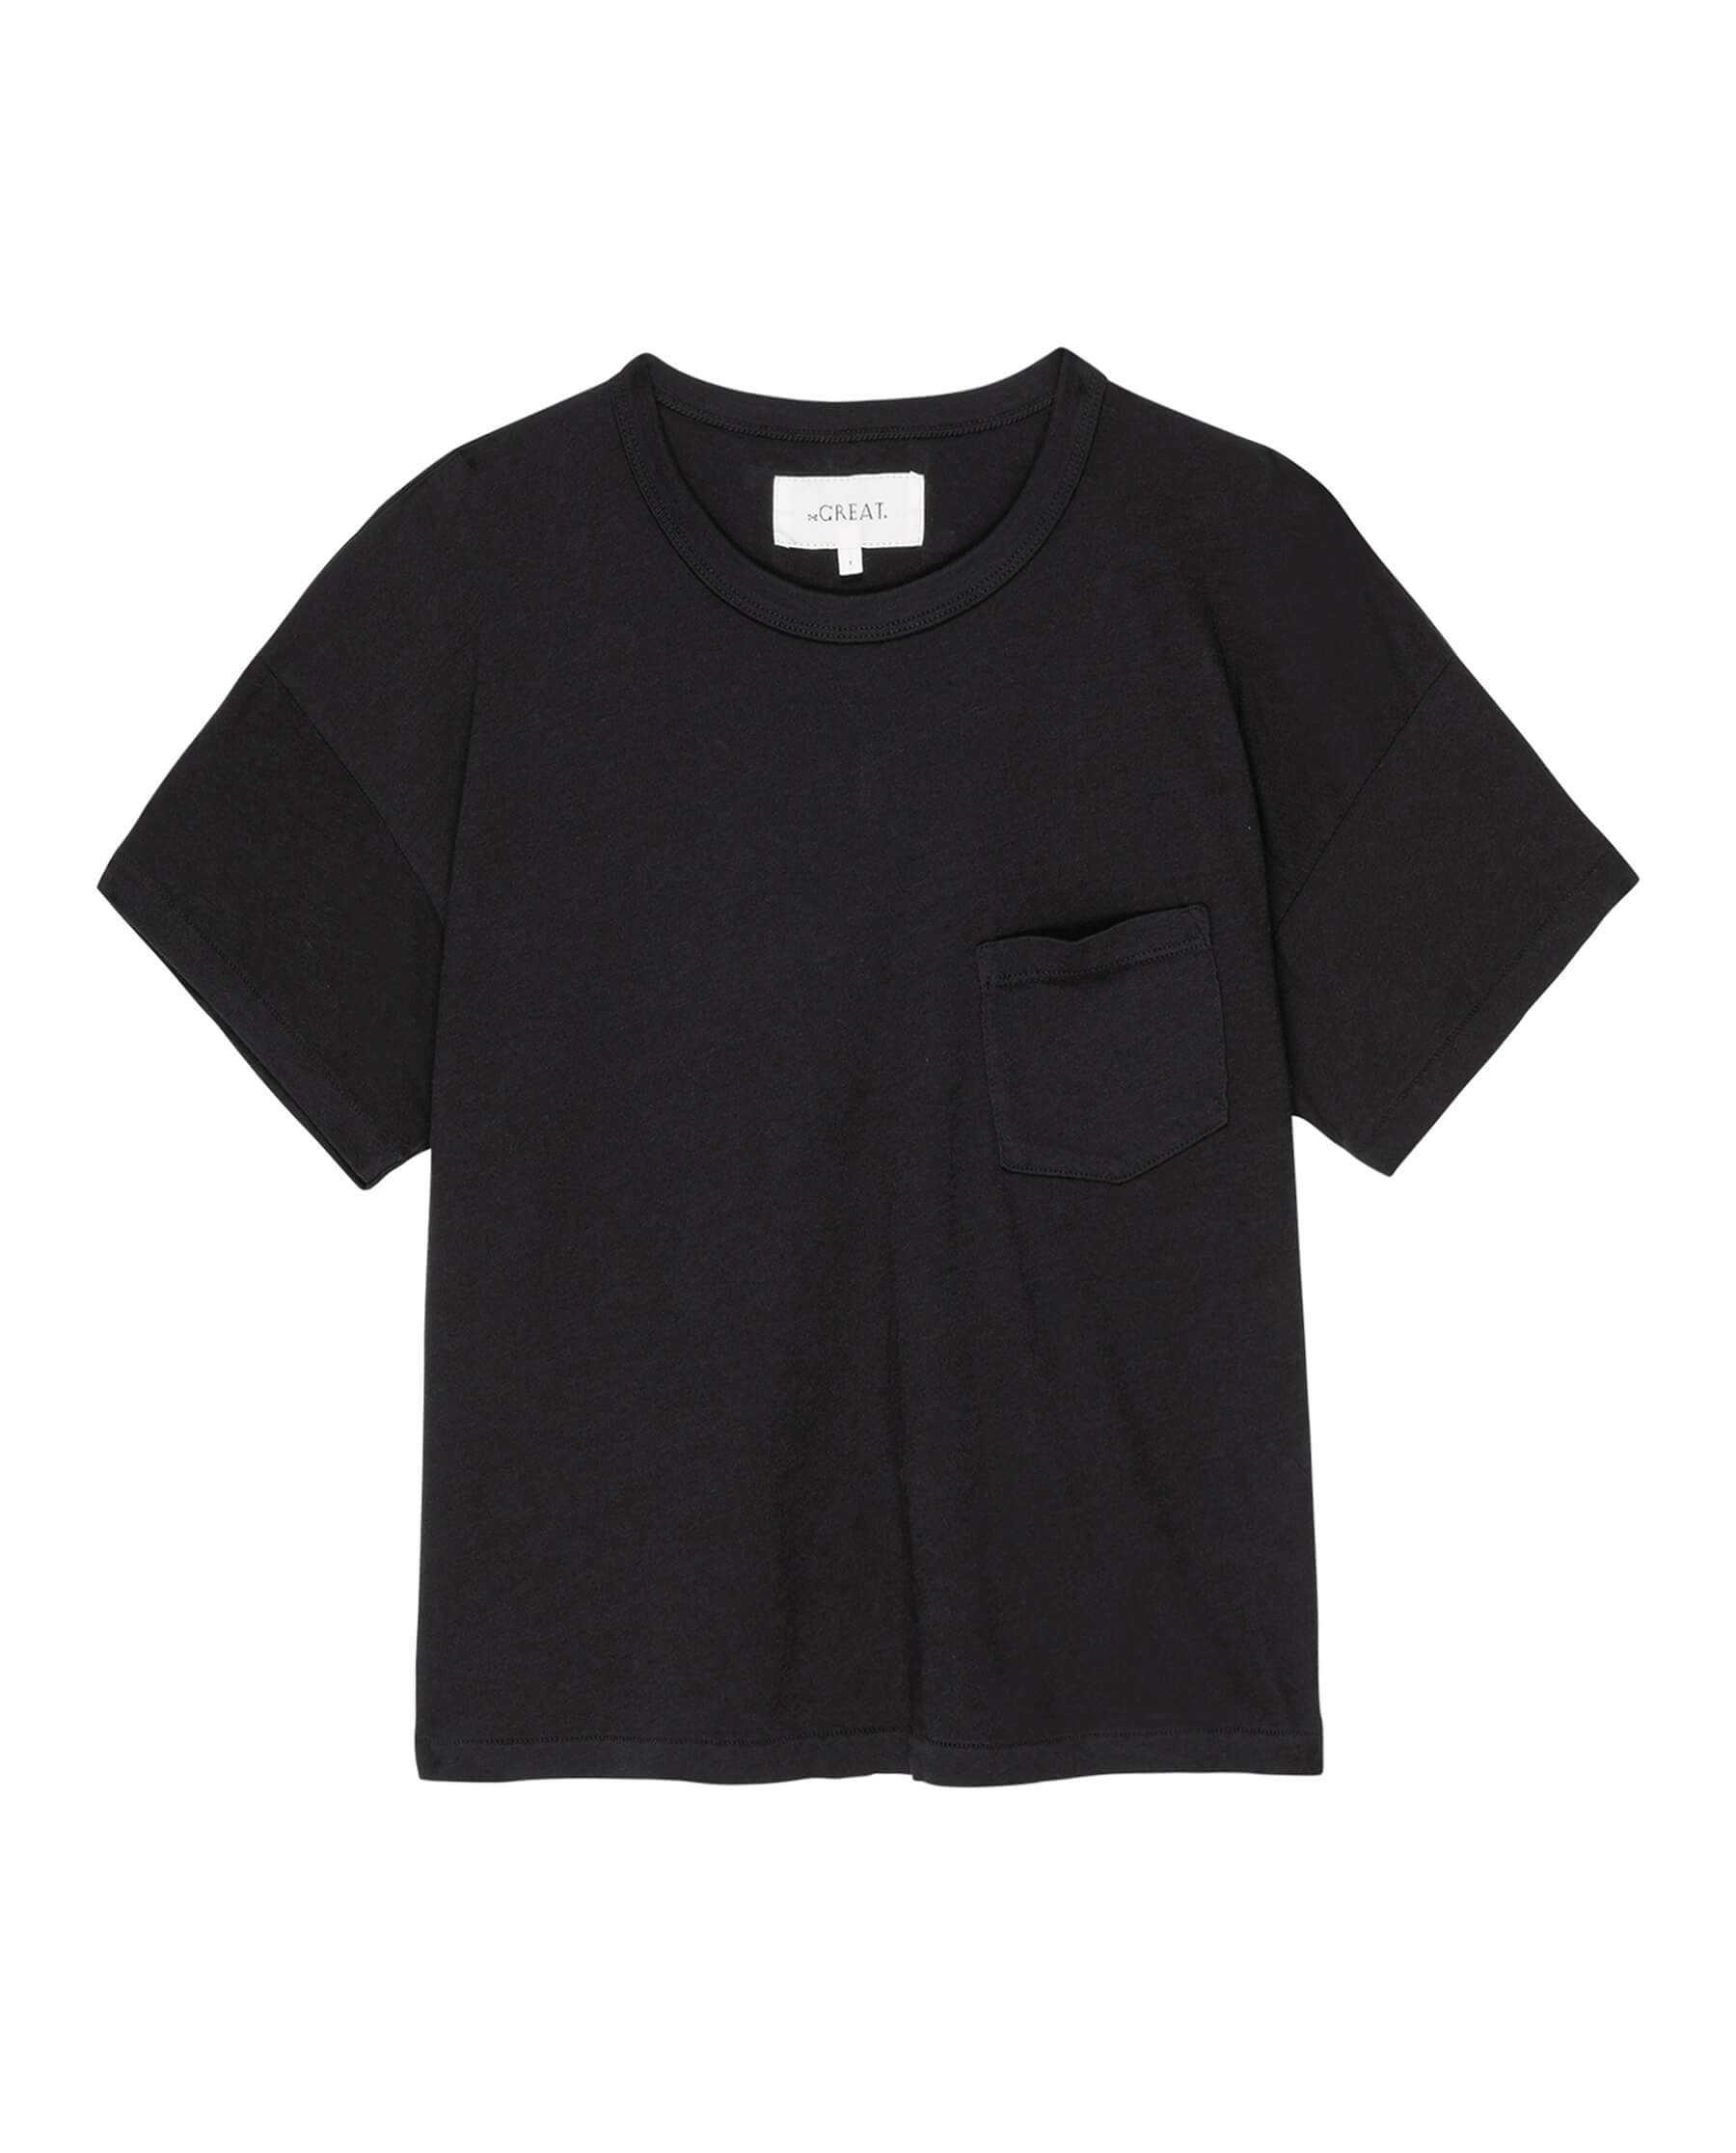 The Pocket Tee. Solid -- Almost Black TEES THE GREAT. SP23 CORE KNITS